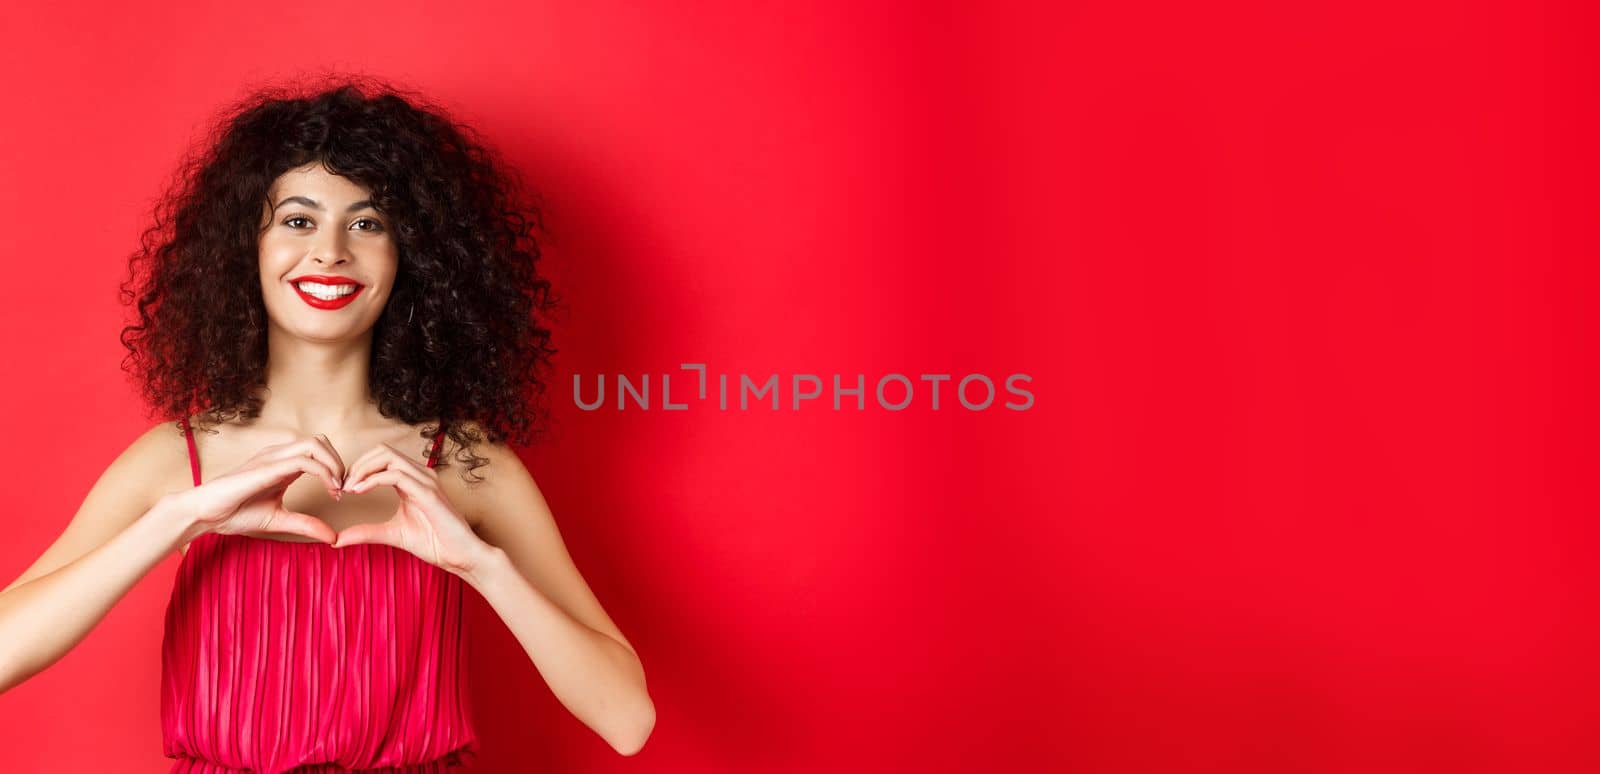 Valentines day. Romantic girl with curly hairstyle in evening dress, smiling and showing heart sign, say I love you on lovers holiday, standing over red background.